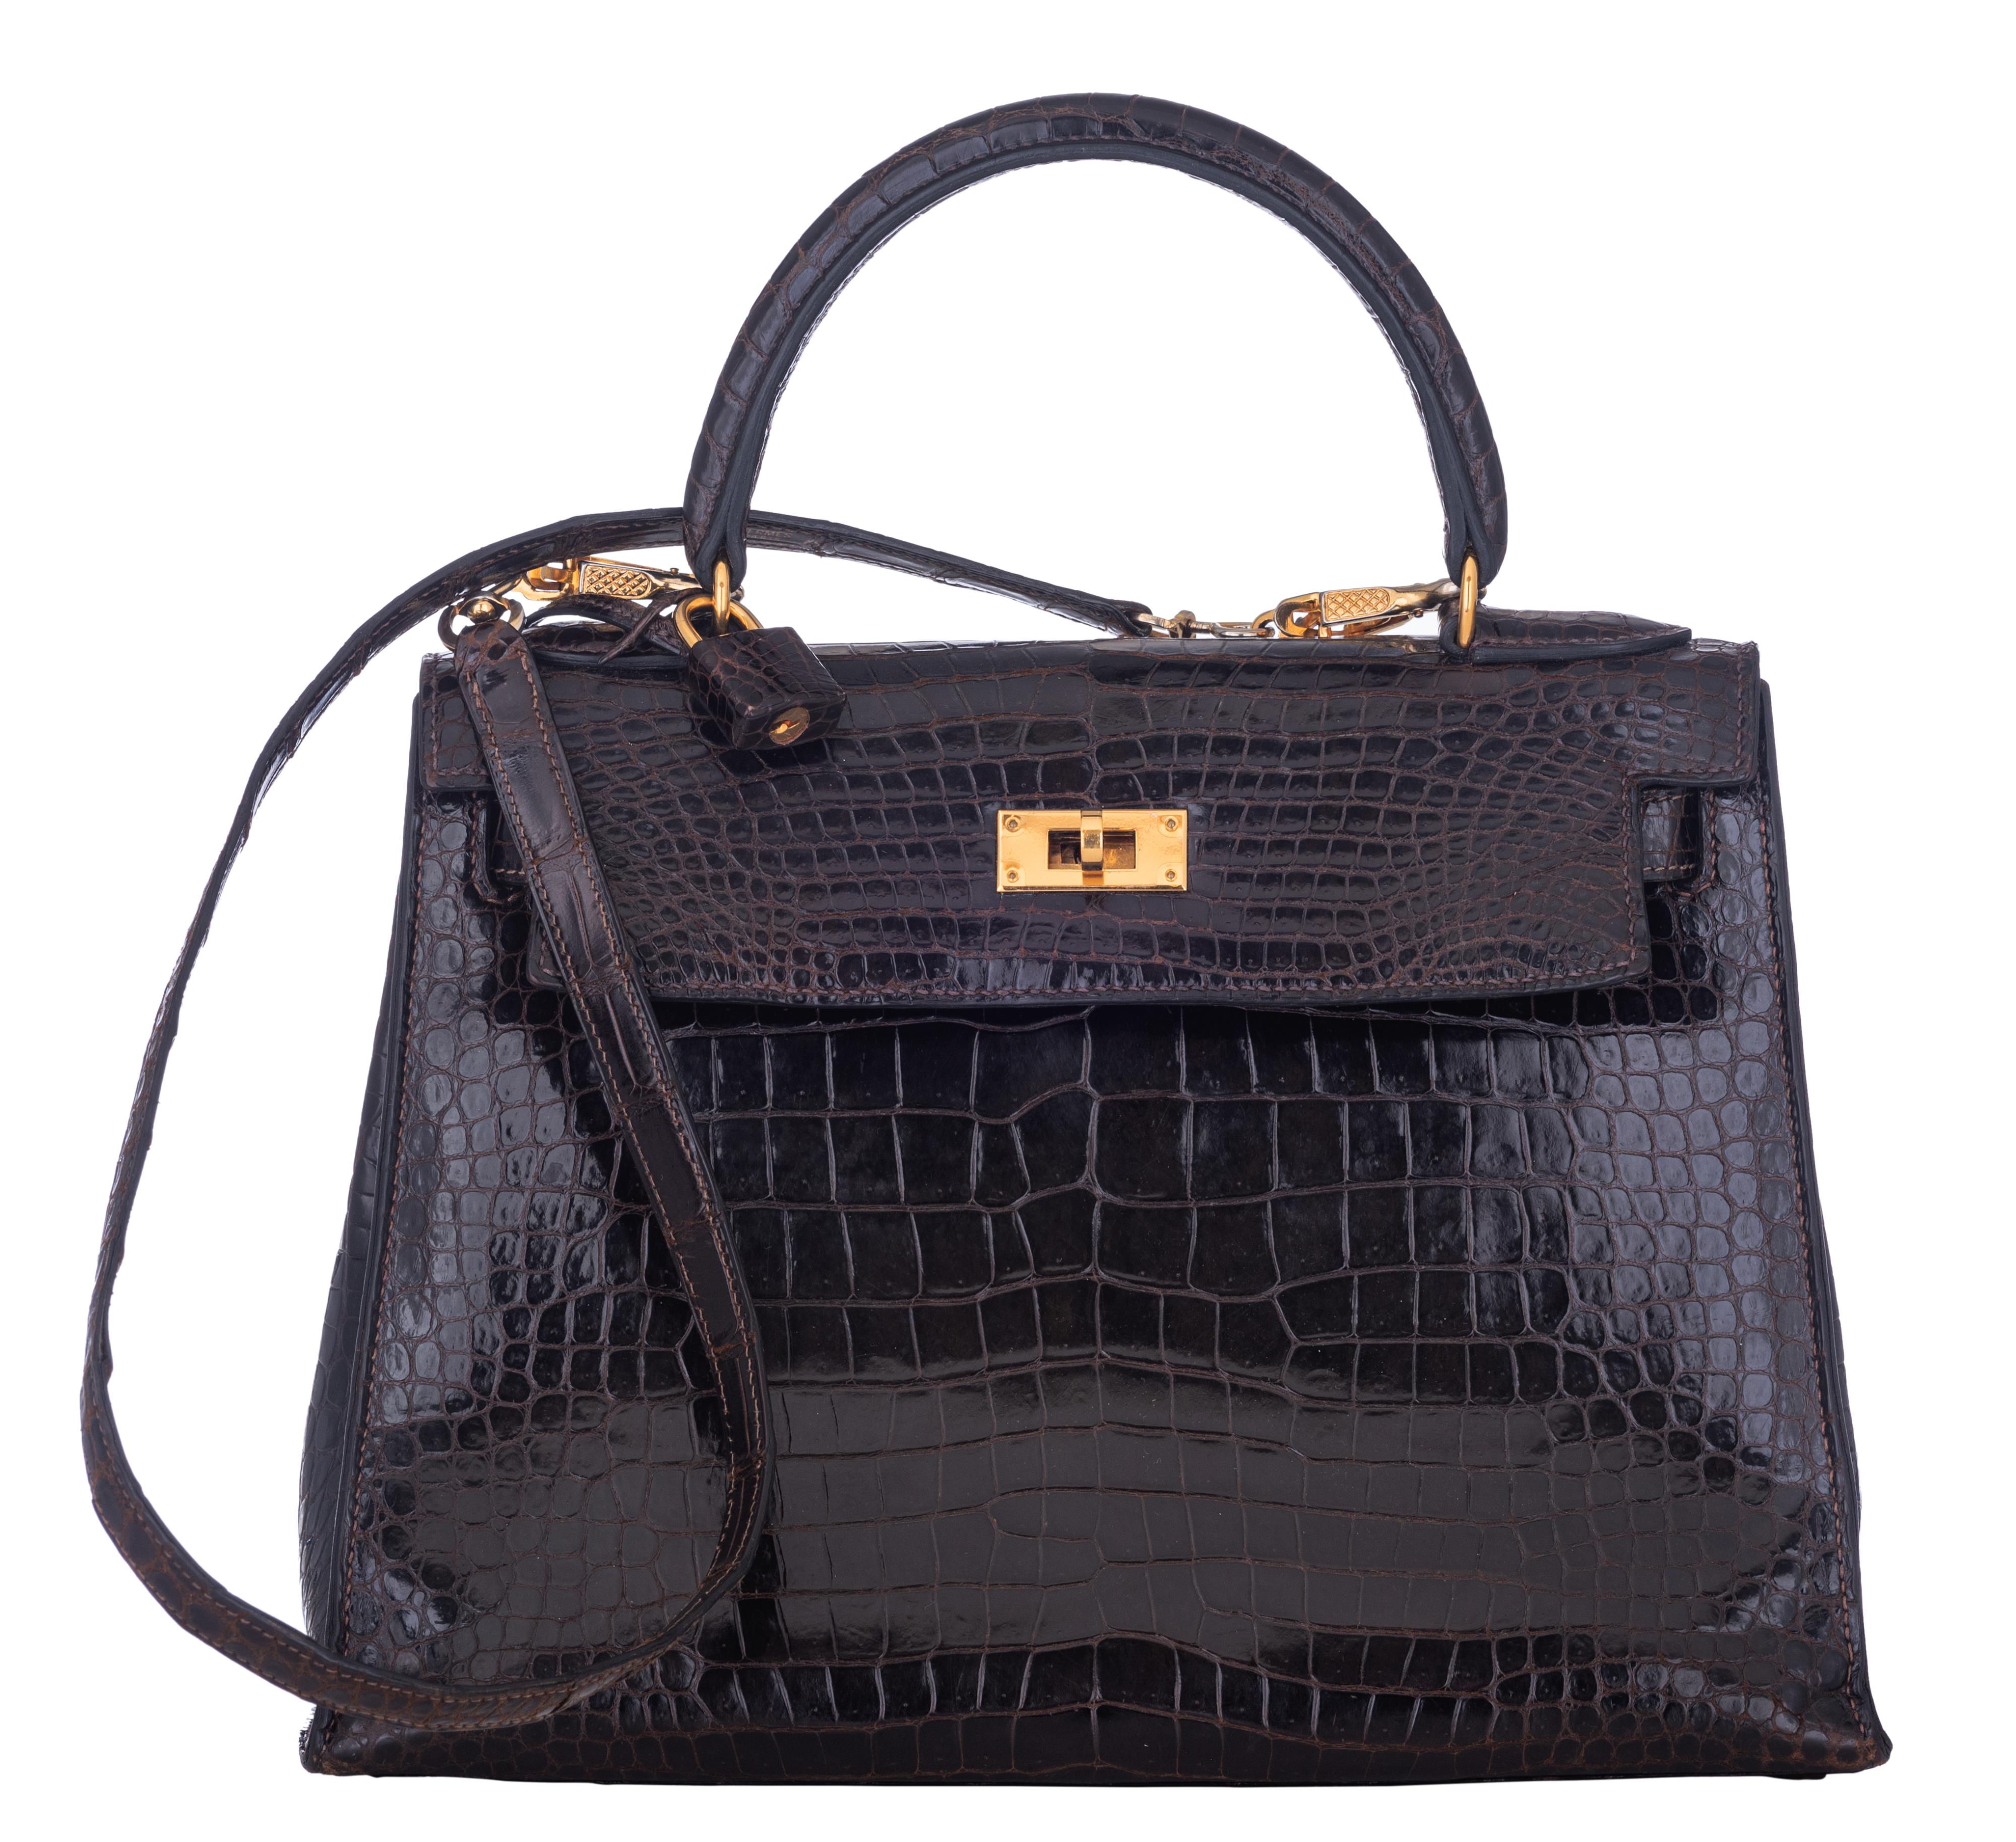 HERMÈS, Kelly Sellier 29 bag, Brown crocodile leather, with gilt metal hardware, Vintage about 1975 - Image 2 of 15